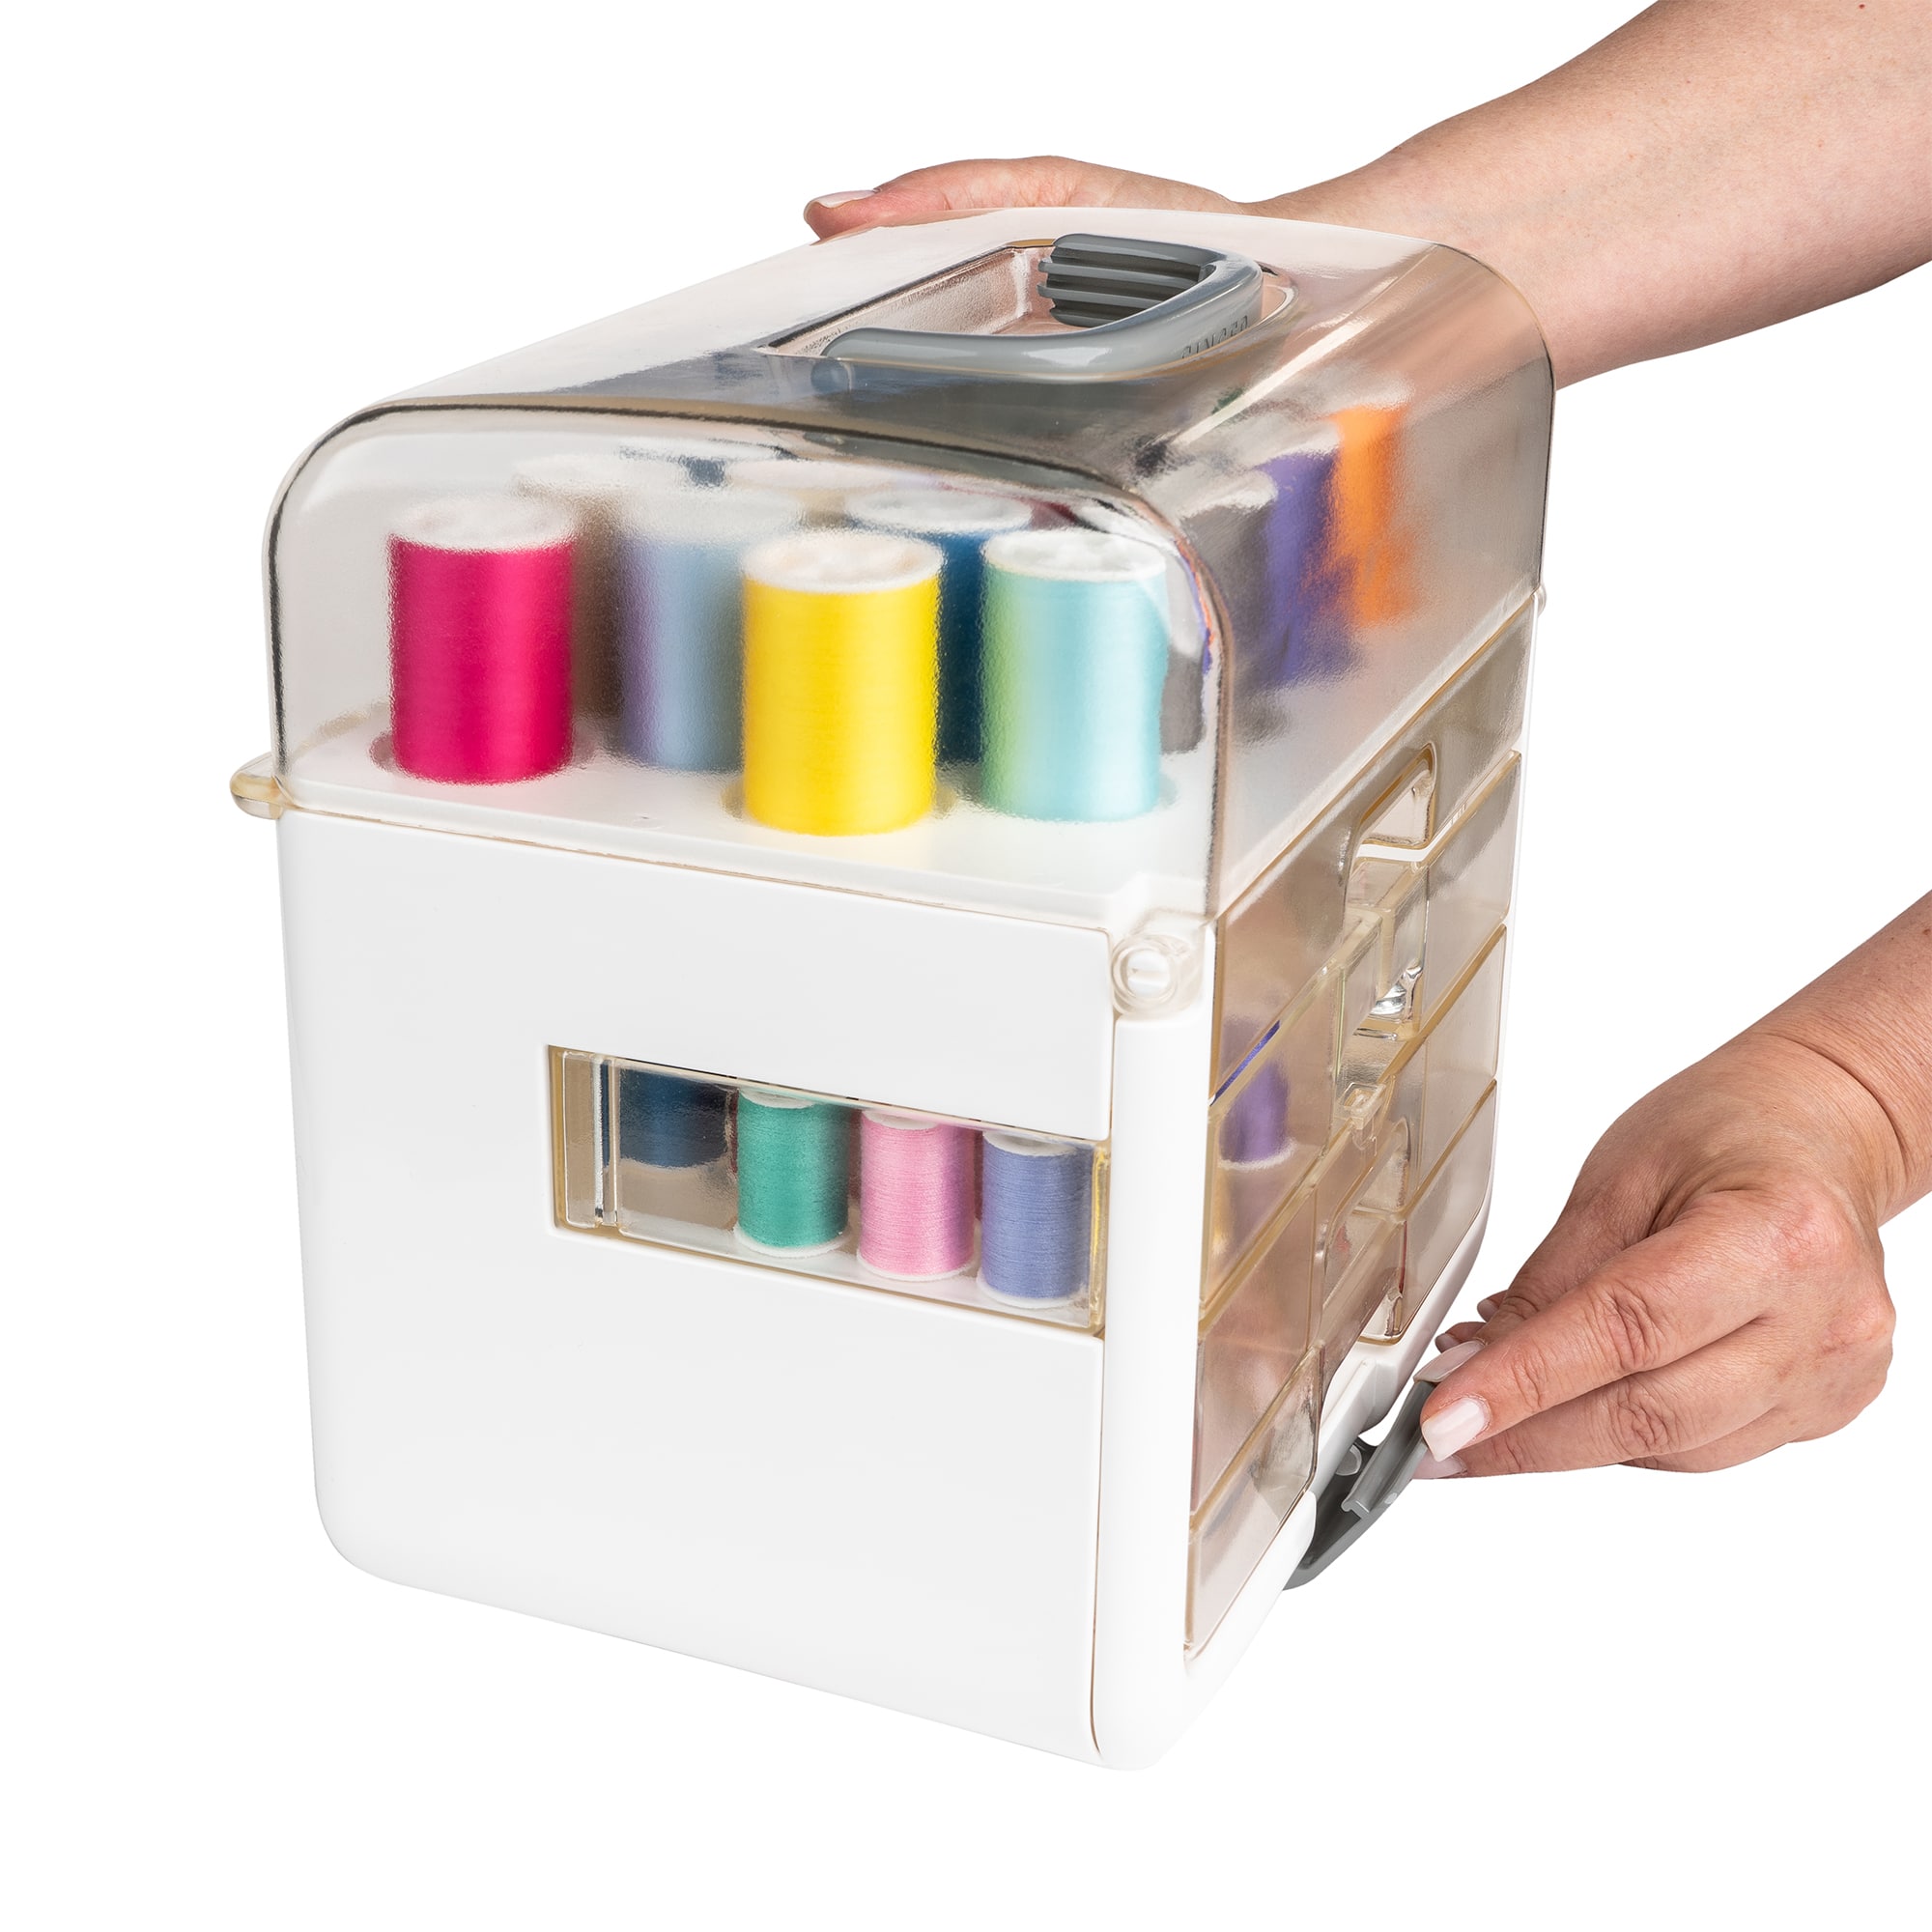 Singer Sew It Goes, Storage System with Sewing Notions, 244 pcs